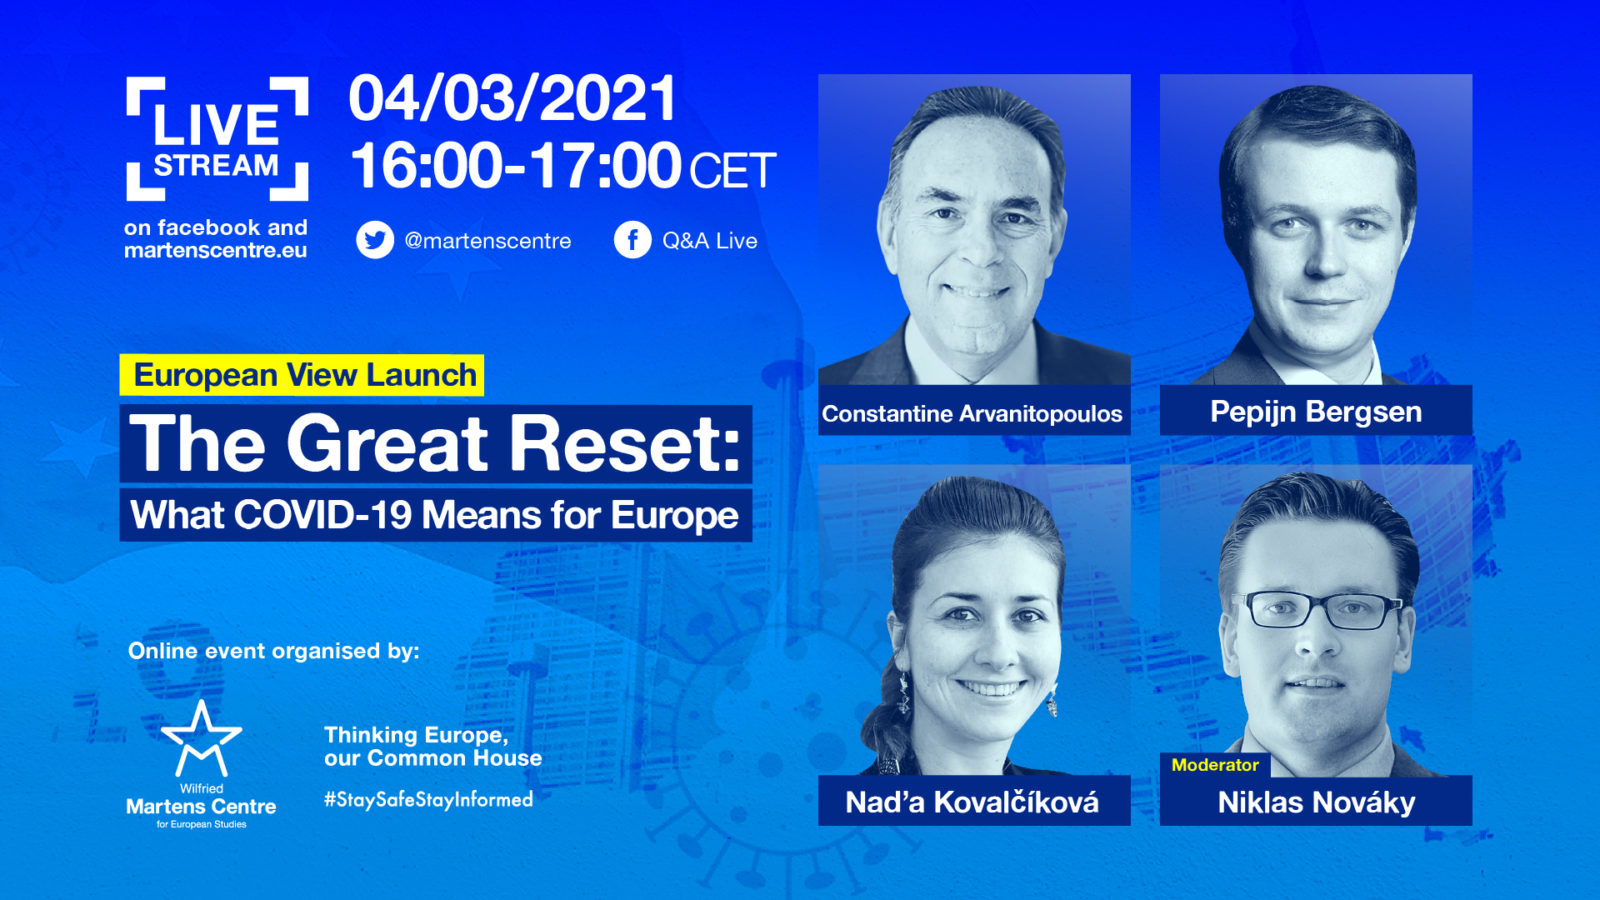 European View Launch The Great Reset: What COVID-19 Means for Europe